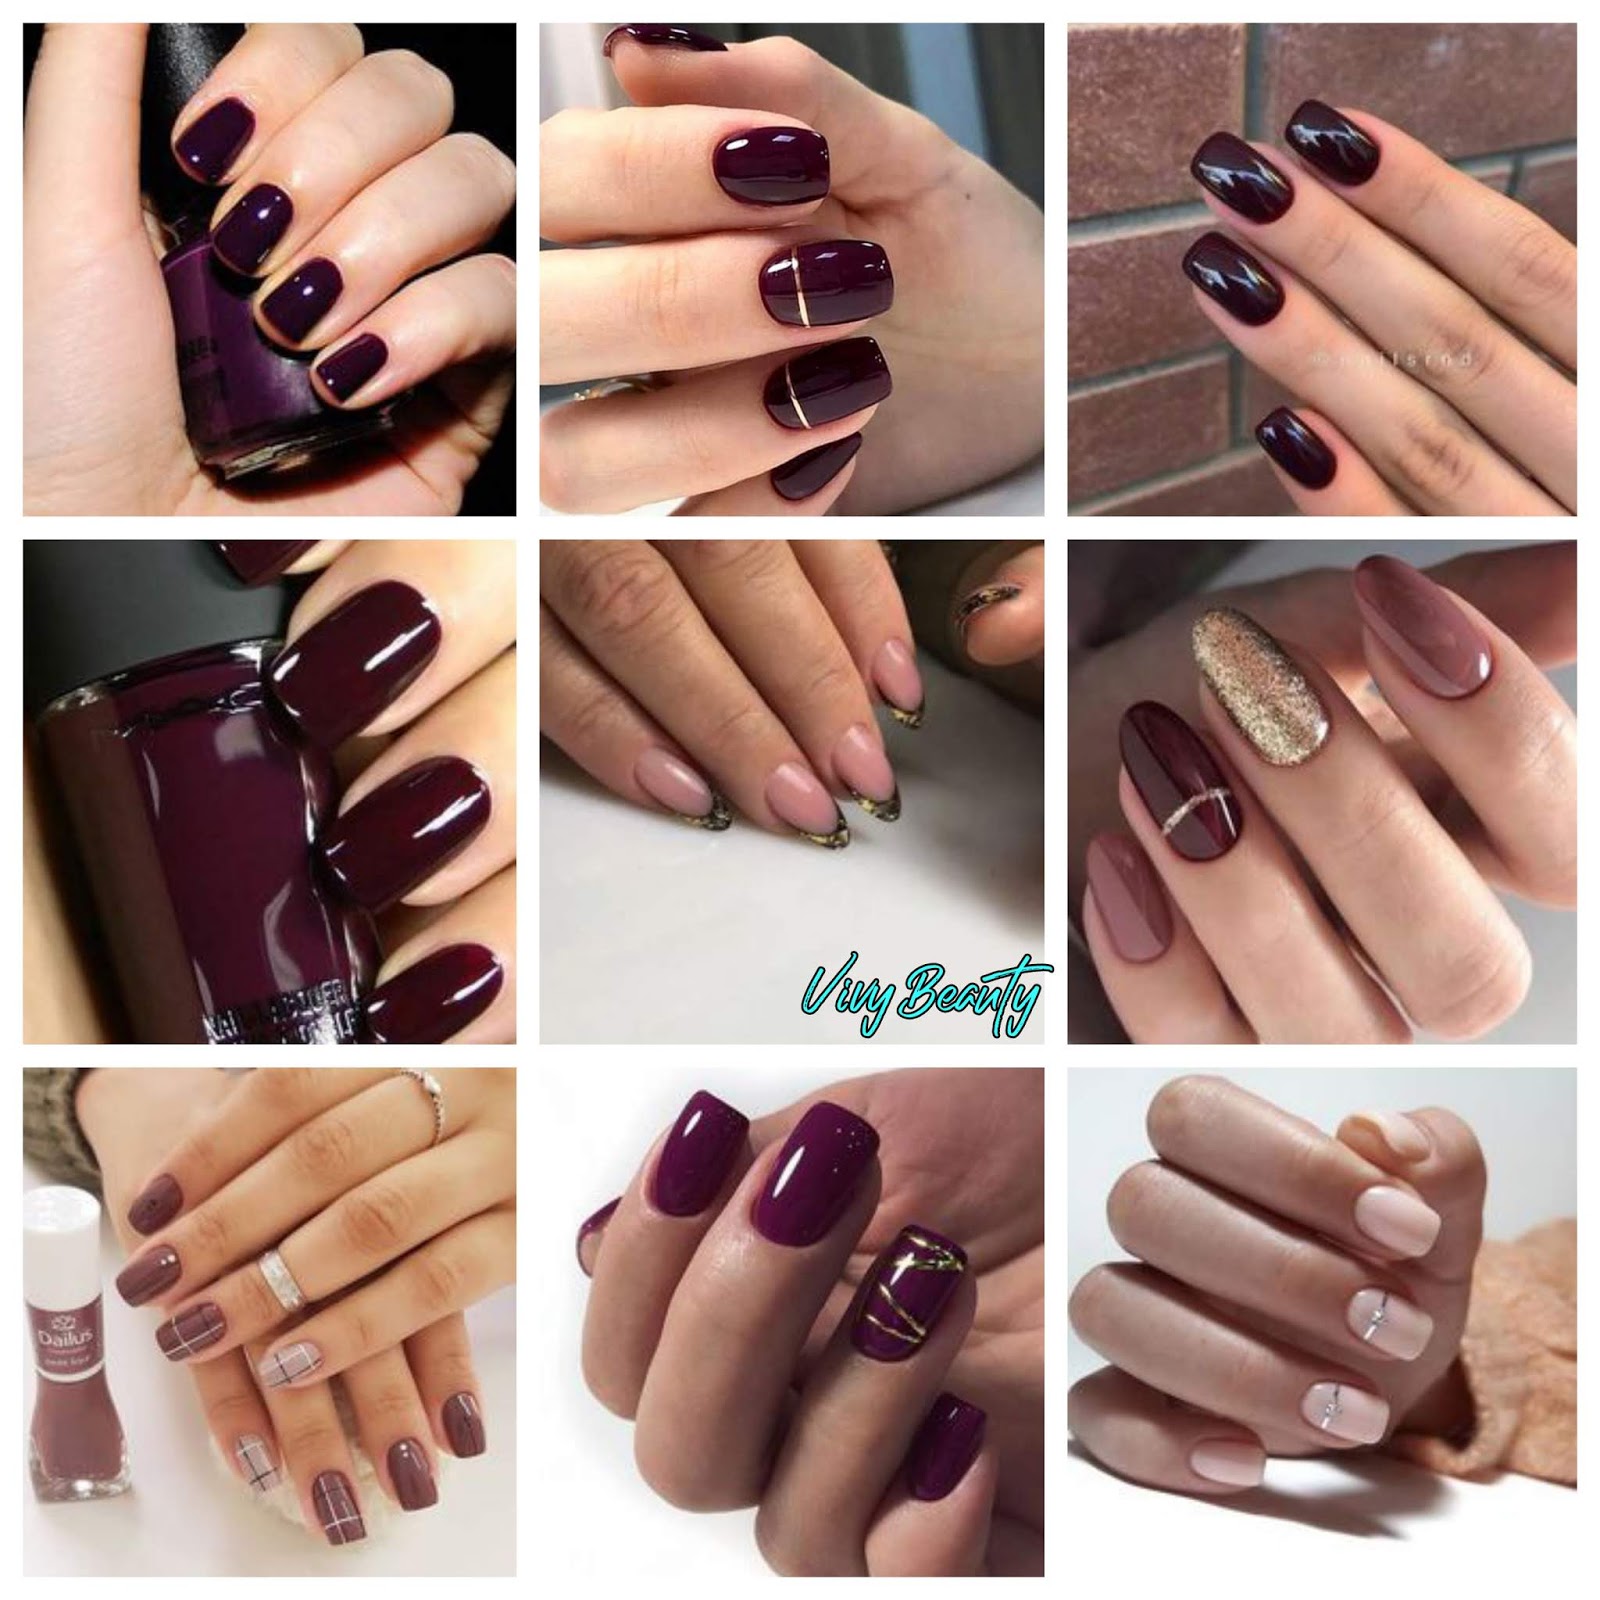 Trendy Winter Nail Colors to Warm Up Your Hands 2020 My Favorite Nails